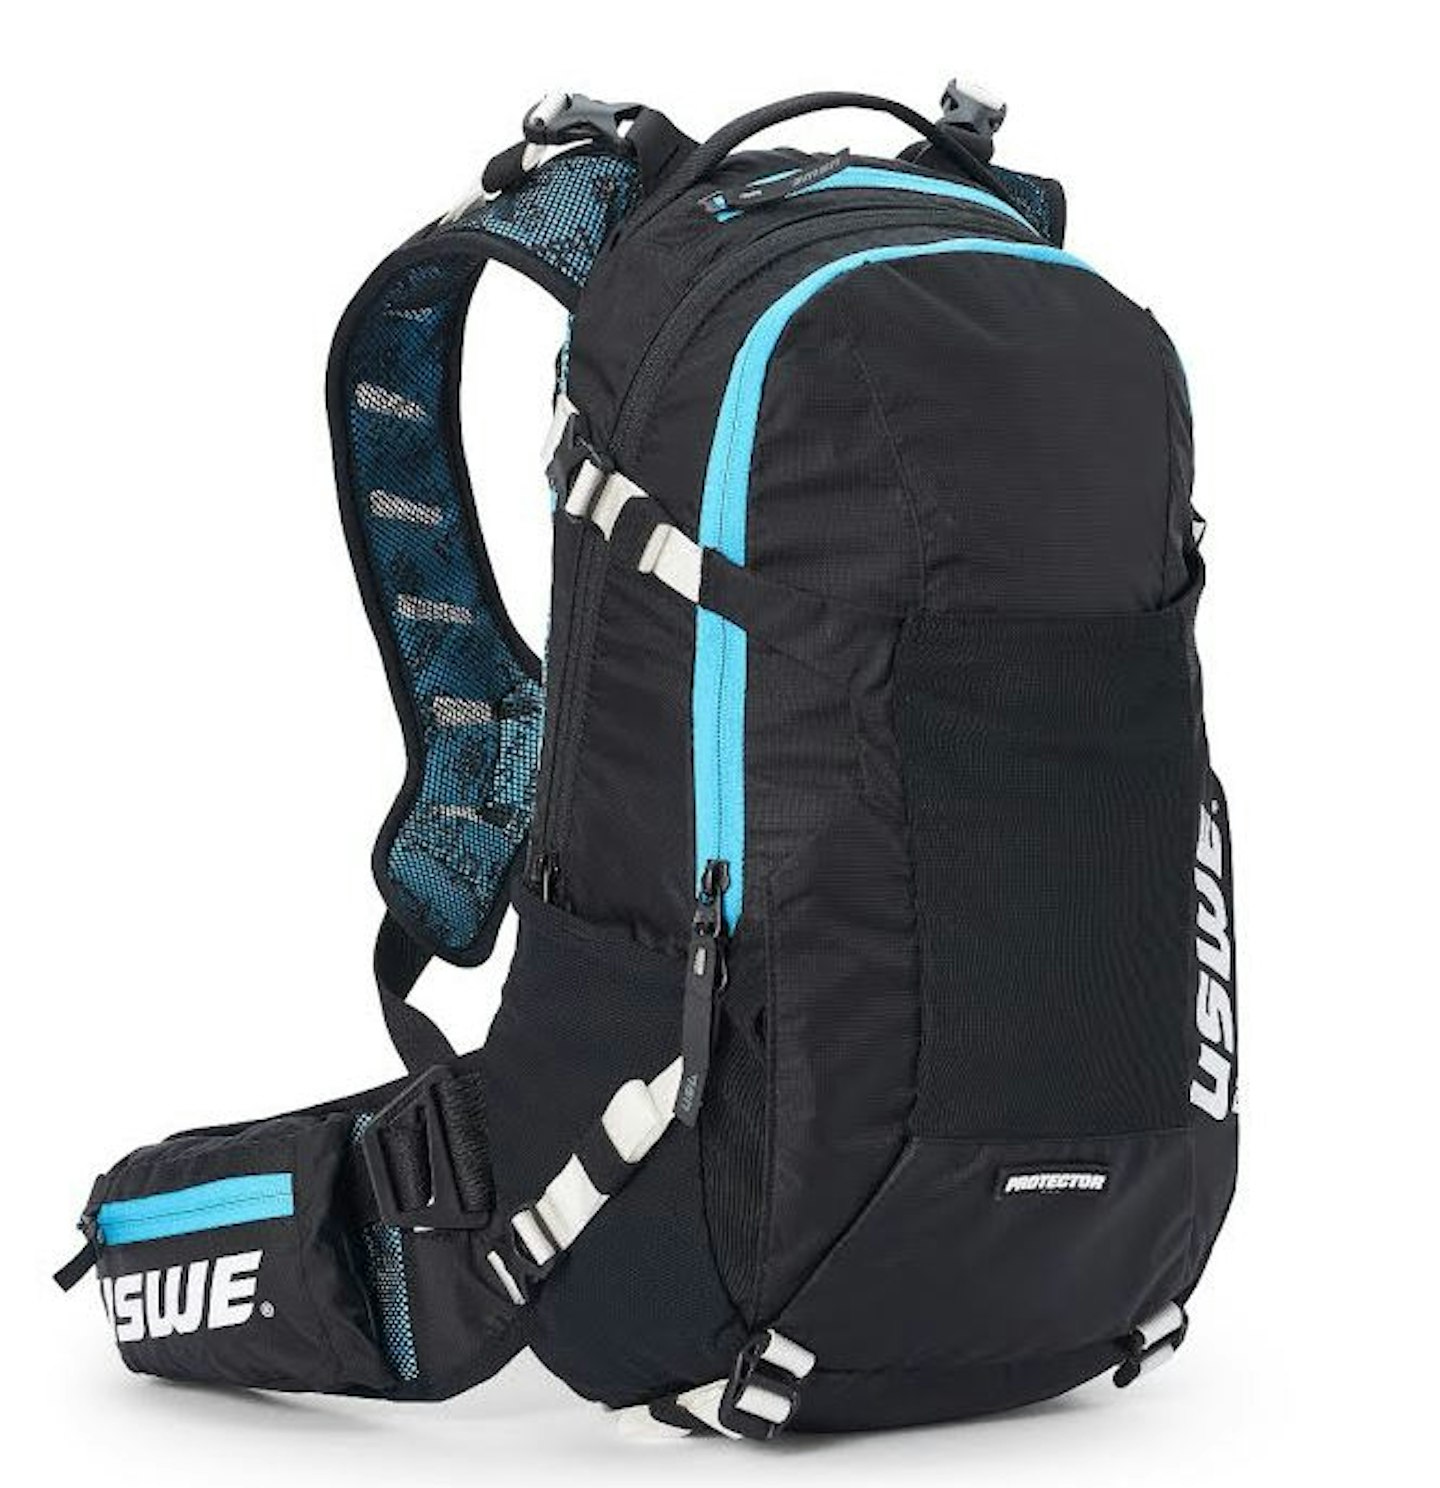 USWE Flow 16 Hydration Backpack